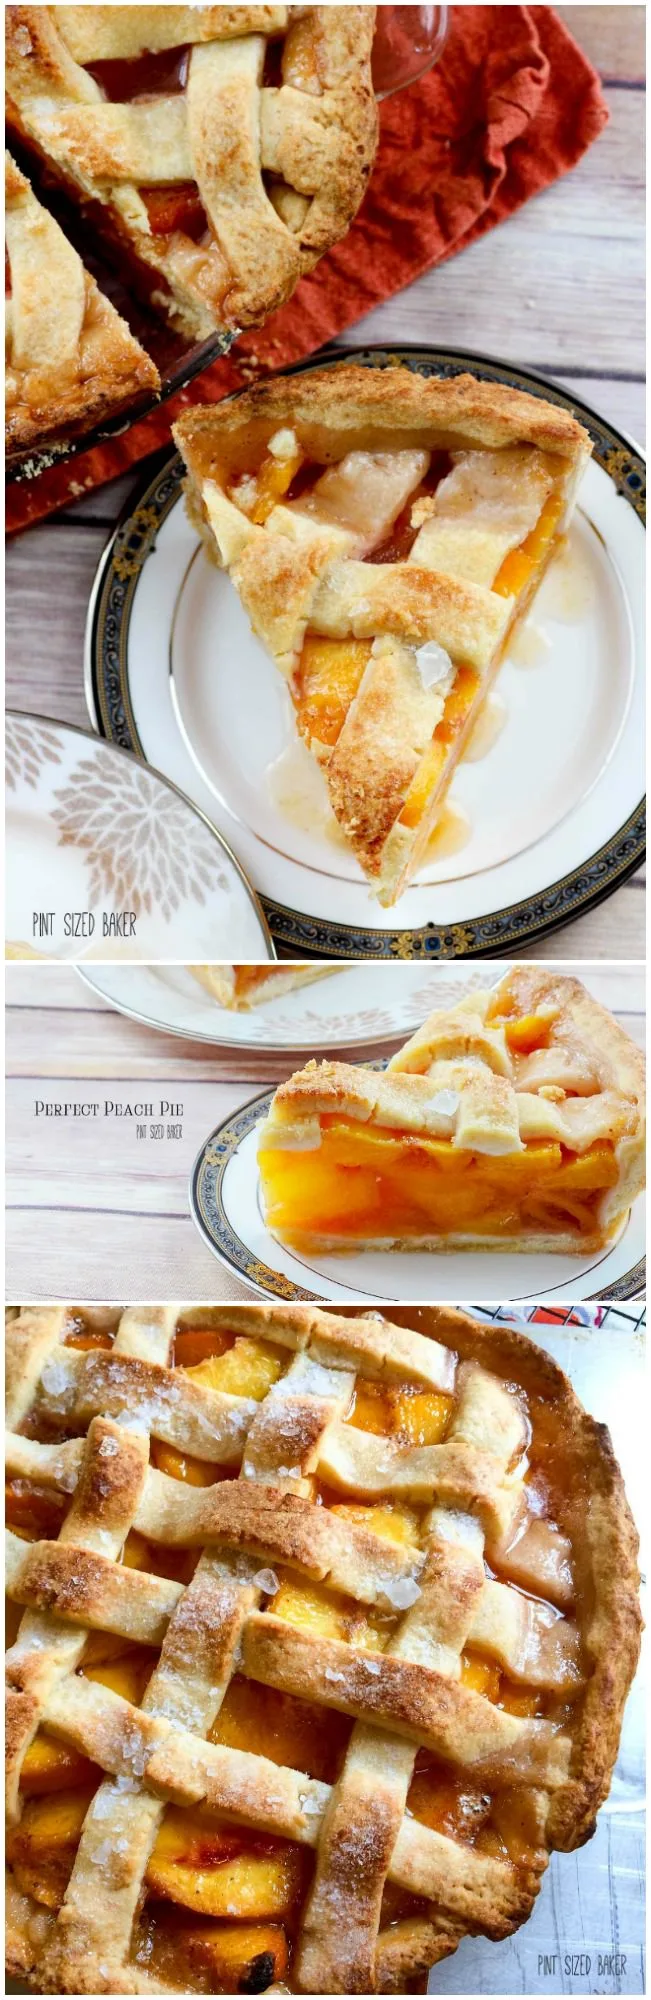 Perfect Peach Pie Recipe. Grab some seasonal fresh peaches and bake a pie. This recipe is the best!